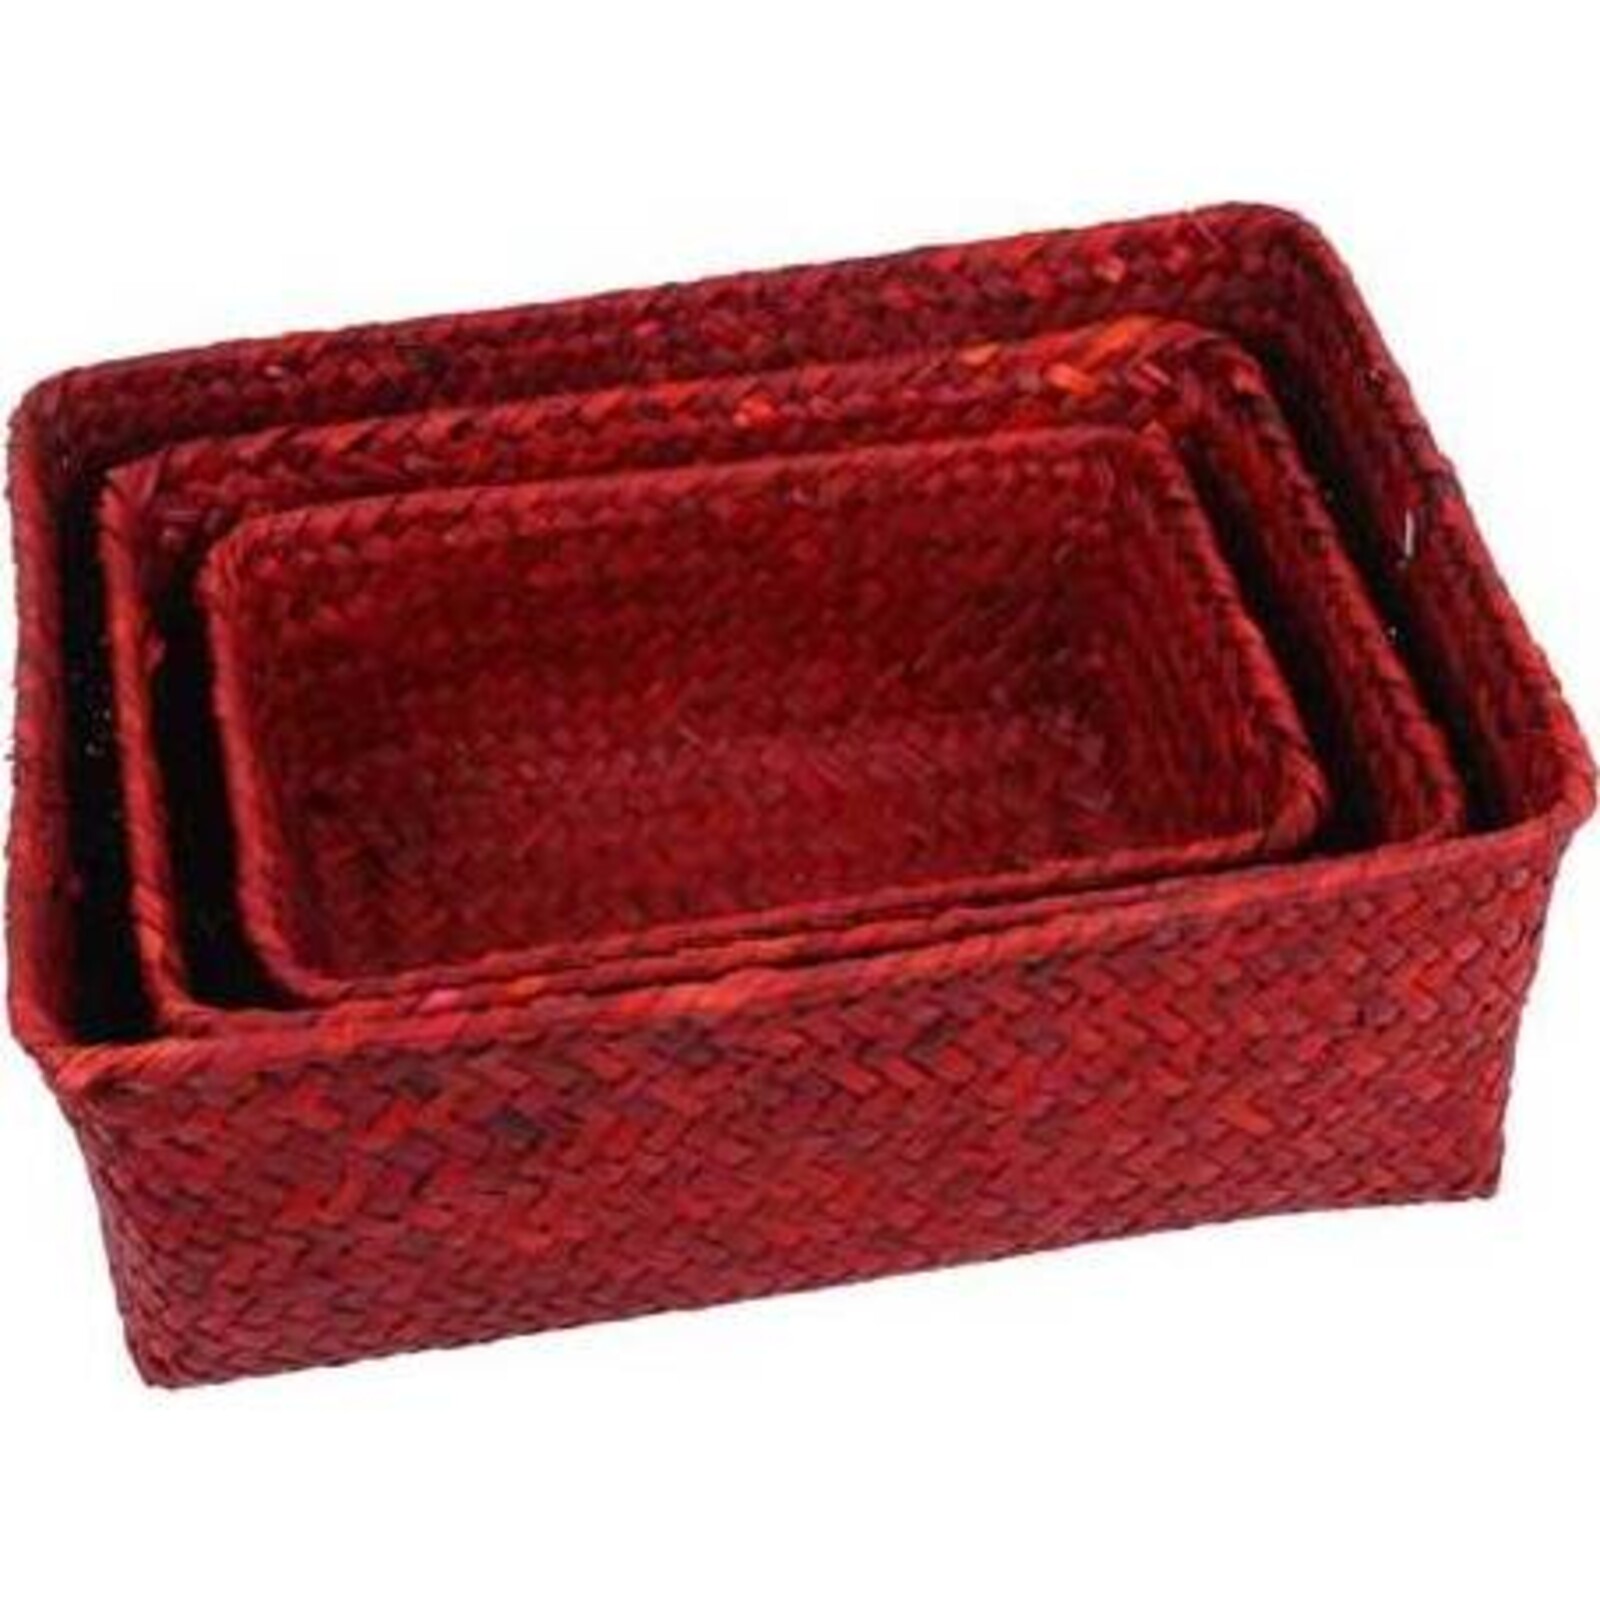 Woven Baskets Red S/3